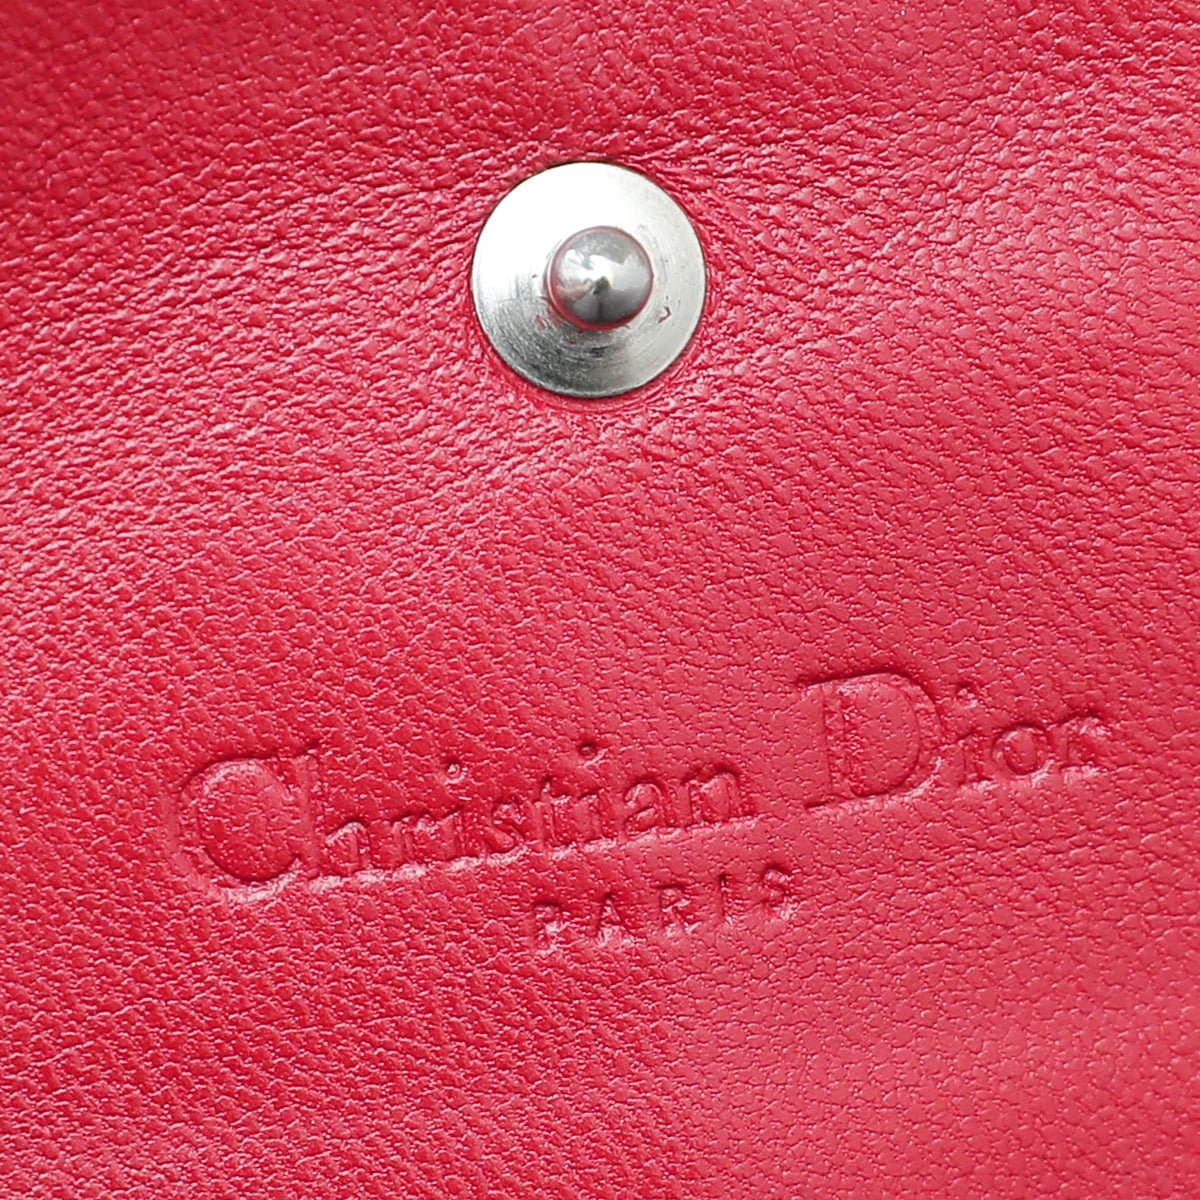 Christian Dior Red Lady Dior Rendezvous Chain Wallet